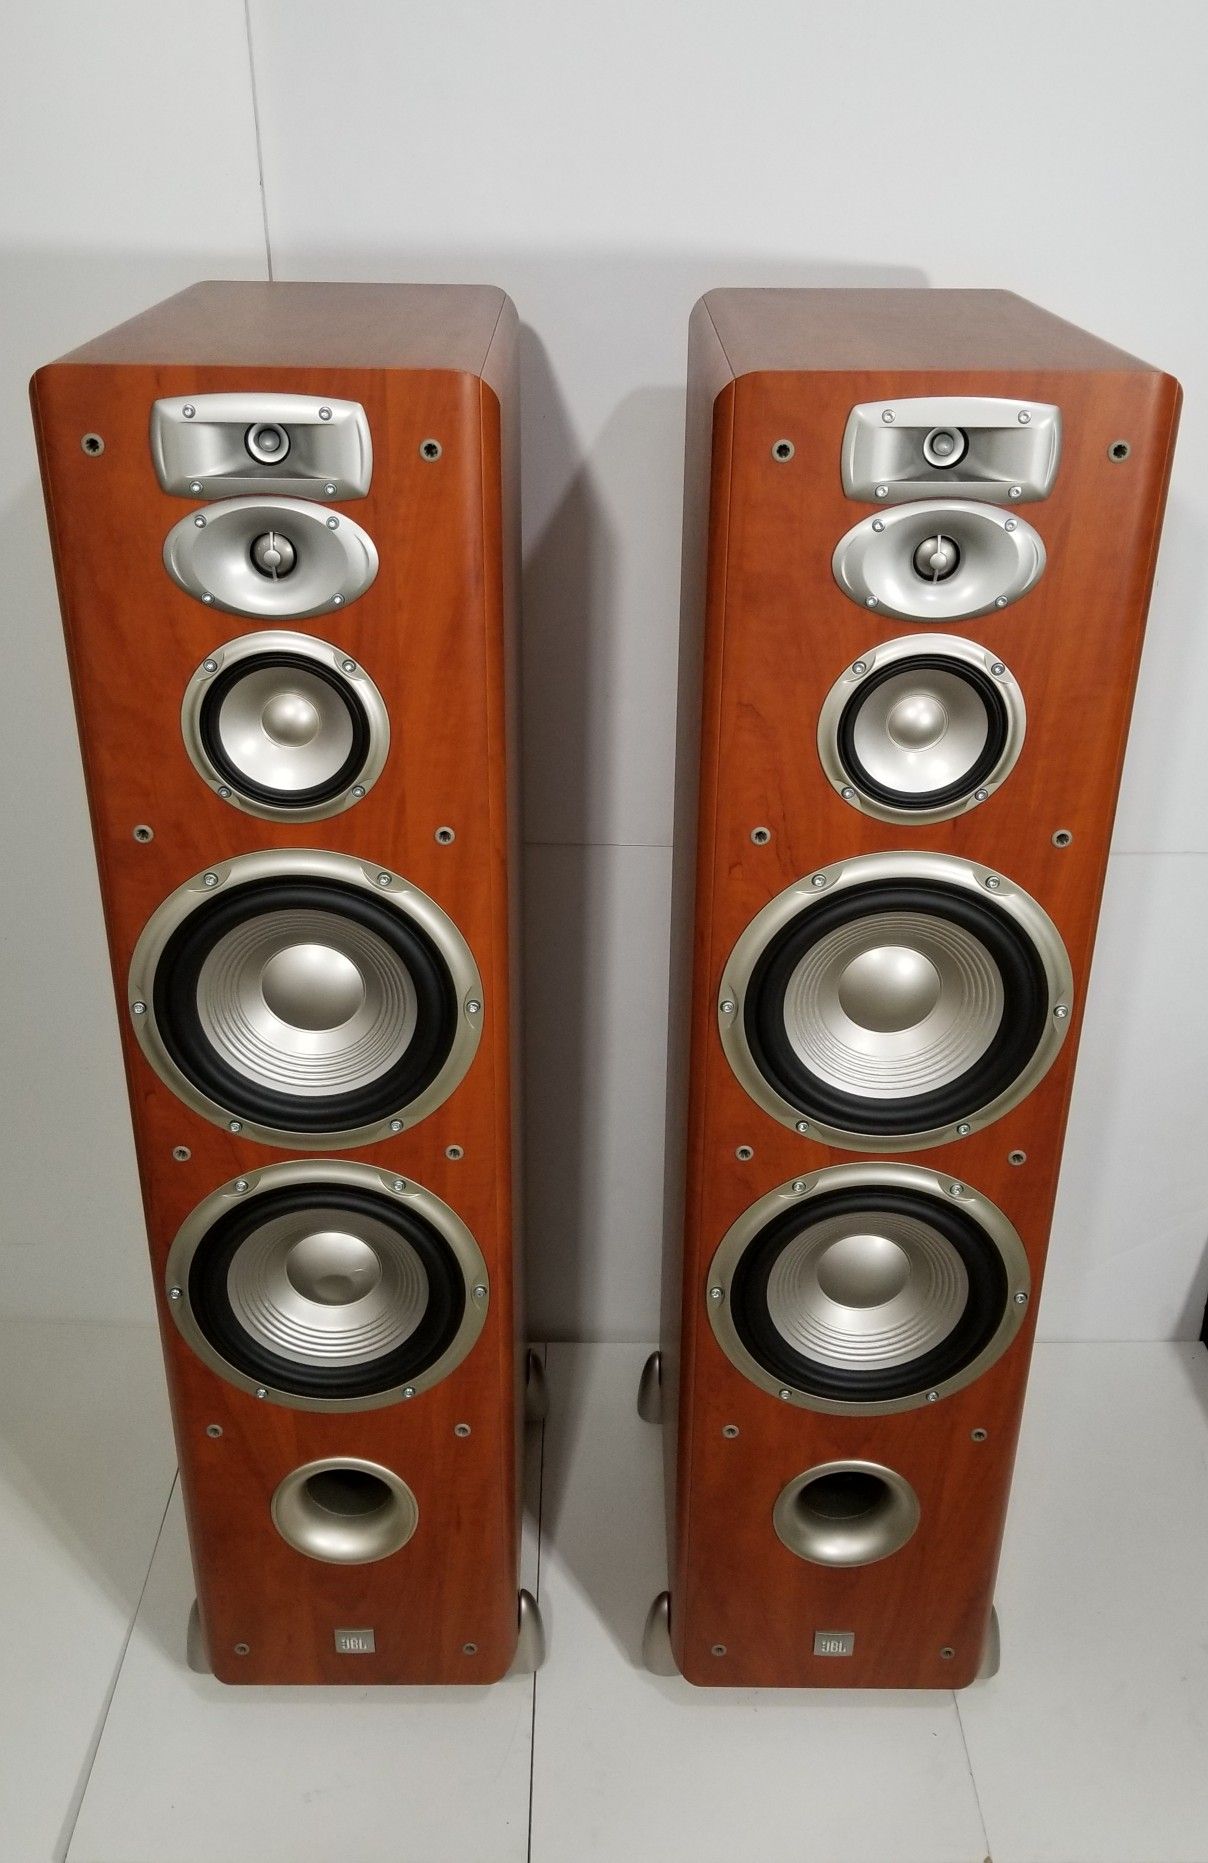 JBL L890 TOWER SPEAKERS for Sale in New - OfferUp